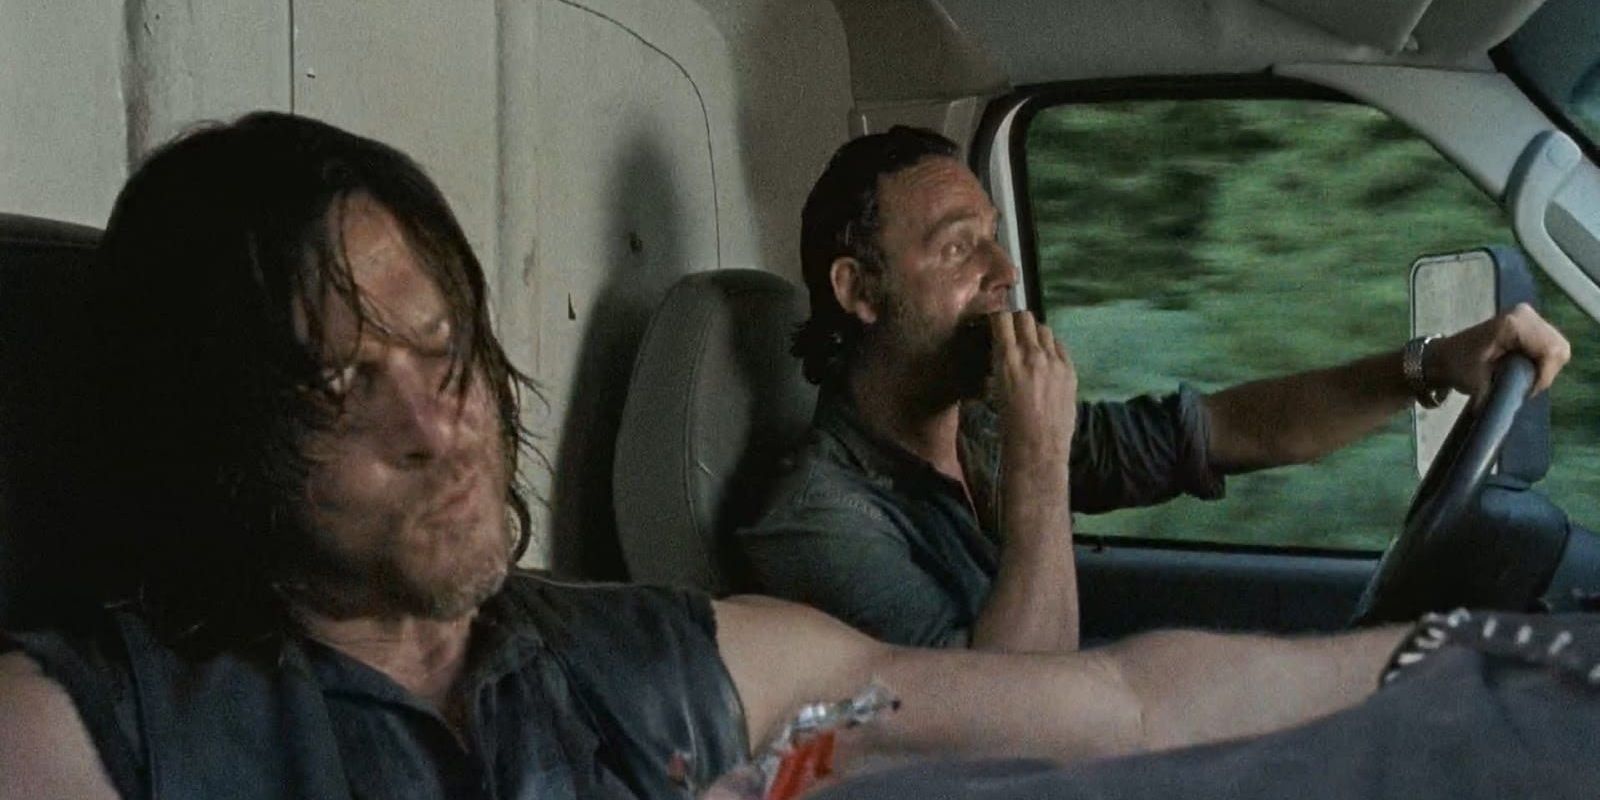 Rick and Daryl in a car eating chocolate